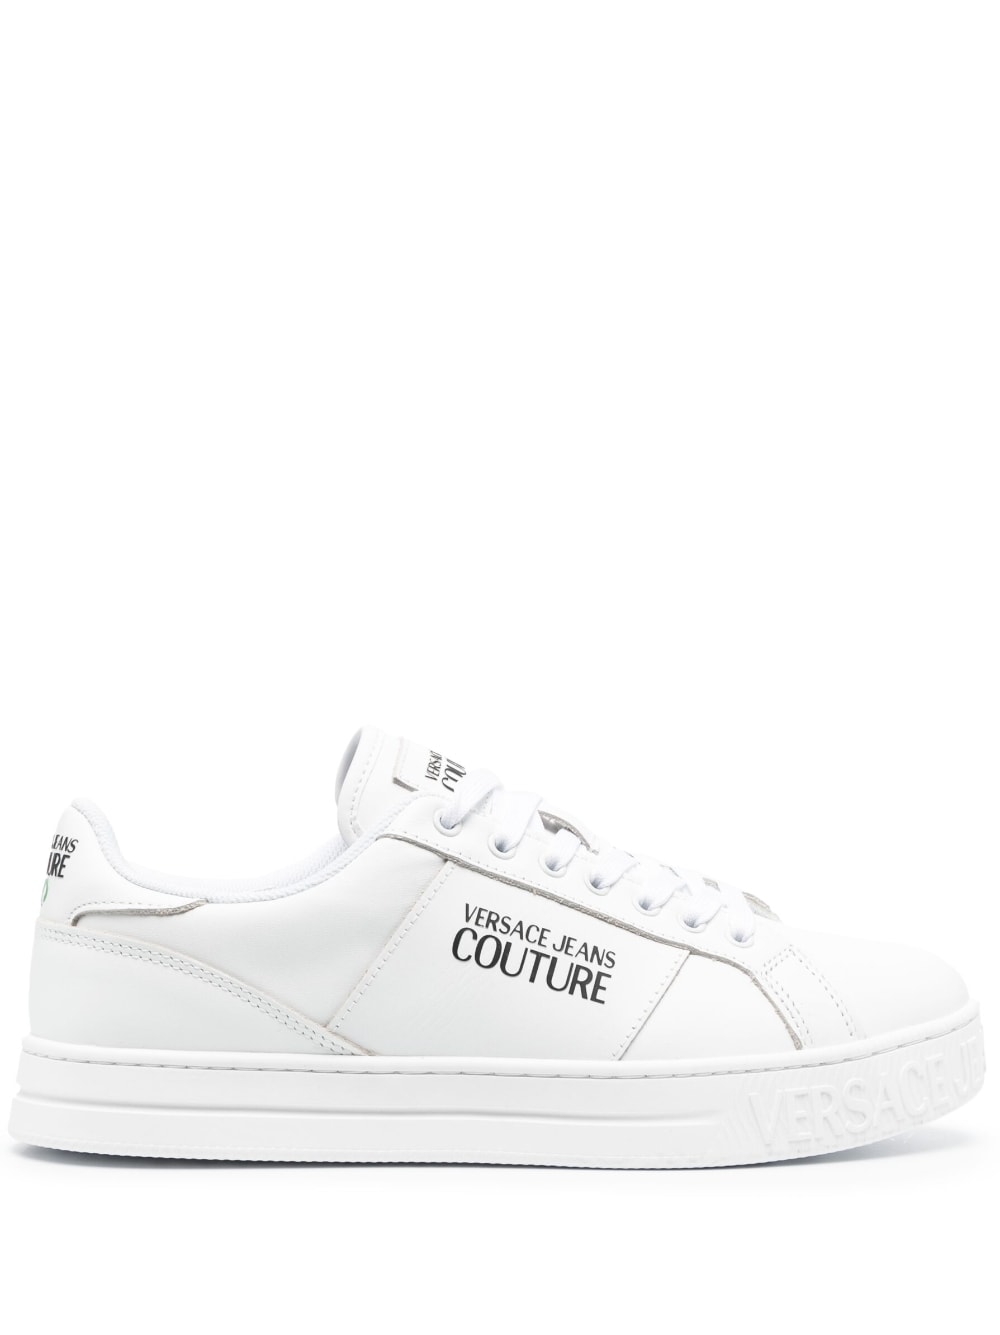 Versace Jeans Couture logo-print low-top leather sneakers - White